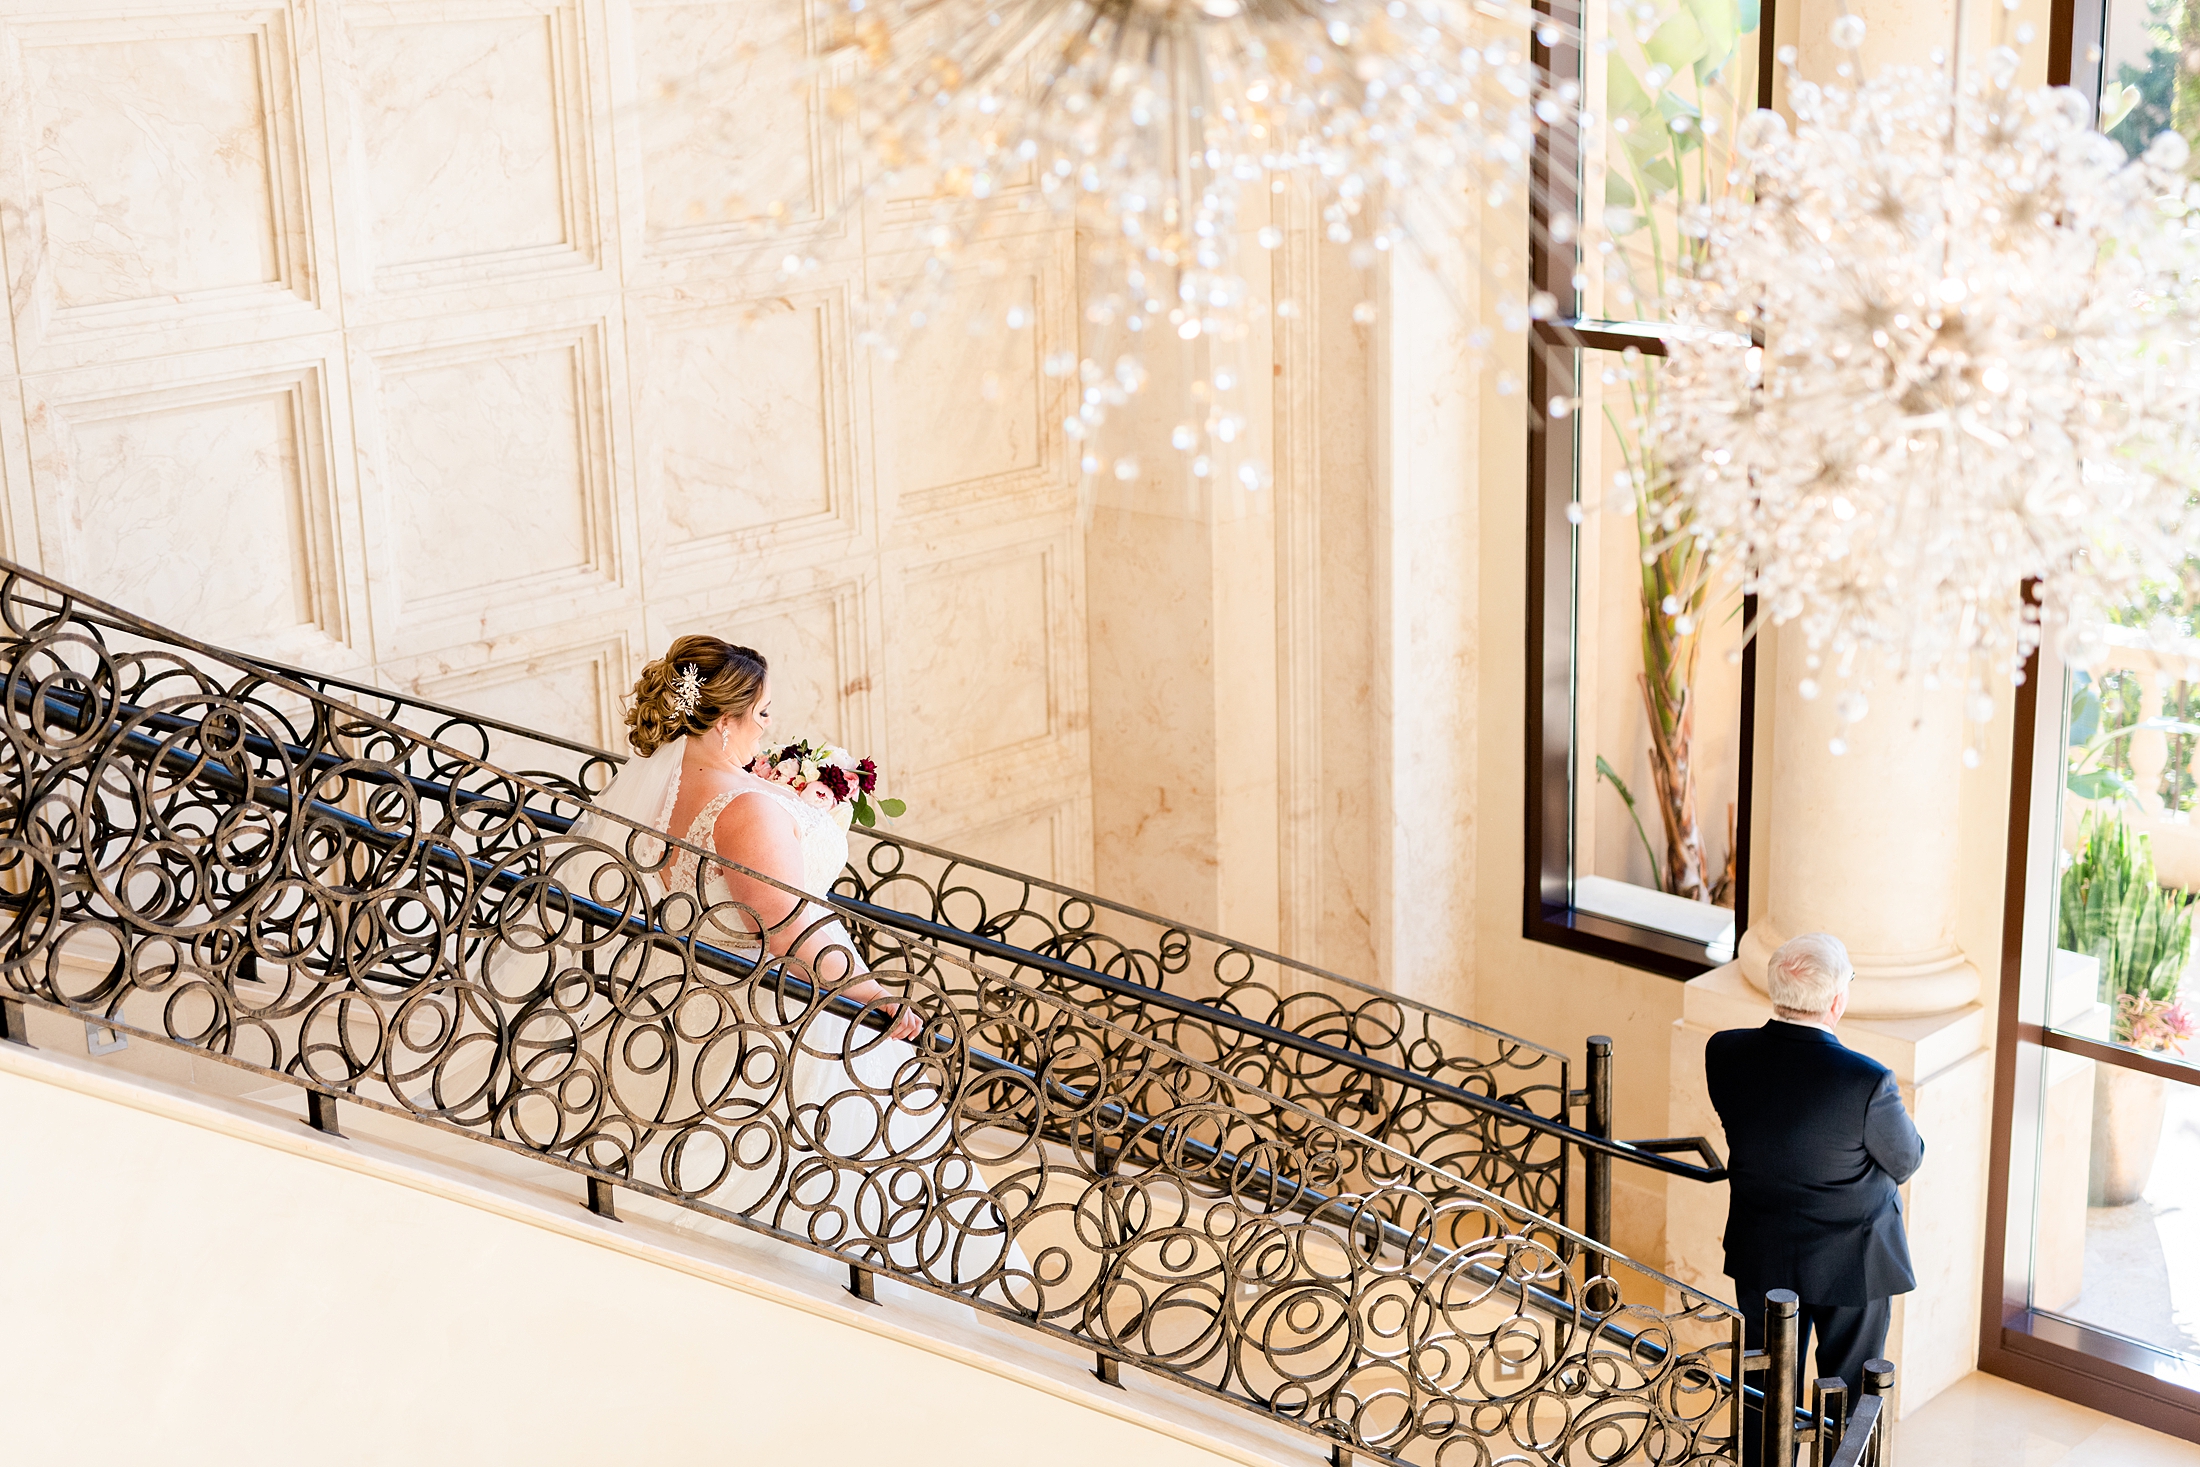 Four Seasons stairs first look | Four Seasons Wedding | Chynna Pacheco Photography